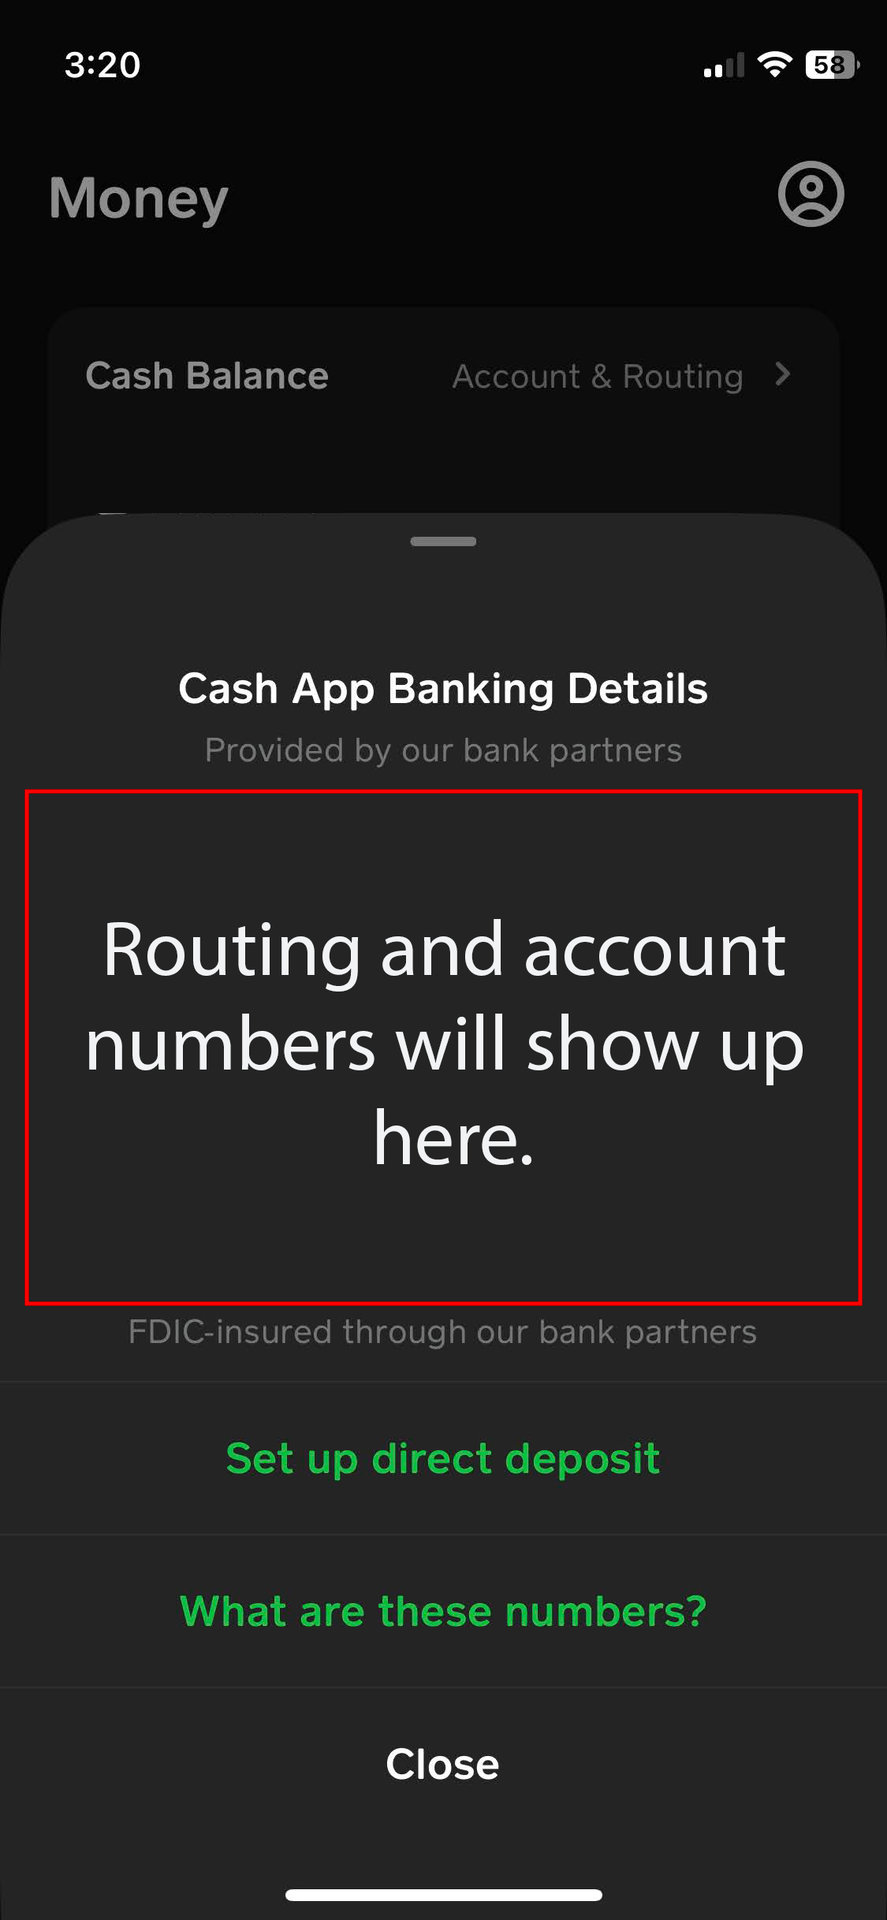 Send money from PayPal directly to Cash App bank account 3